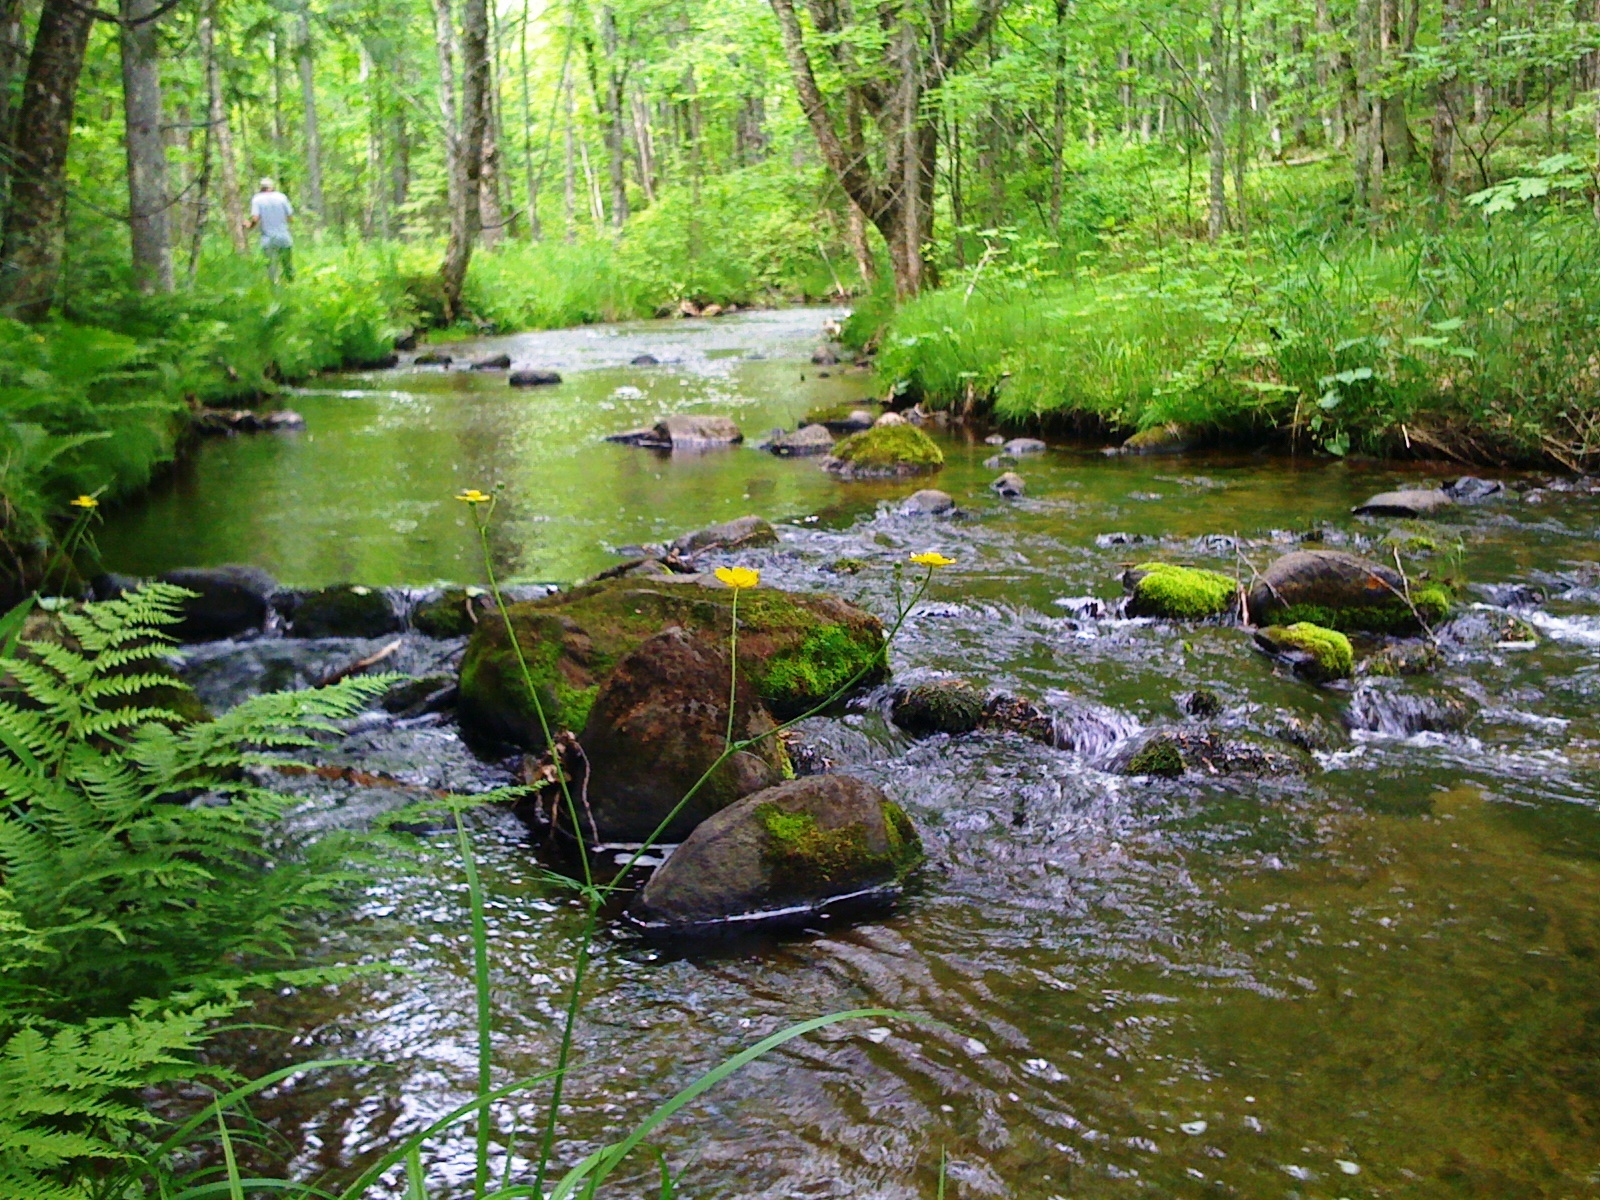 About 3.5 miles of the Pilgrim River, a cold-water trout stream, flow through the Pilgrim River Forest property.